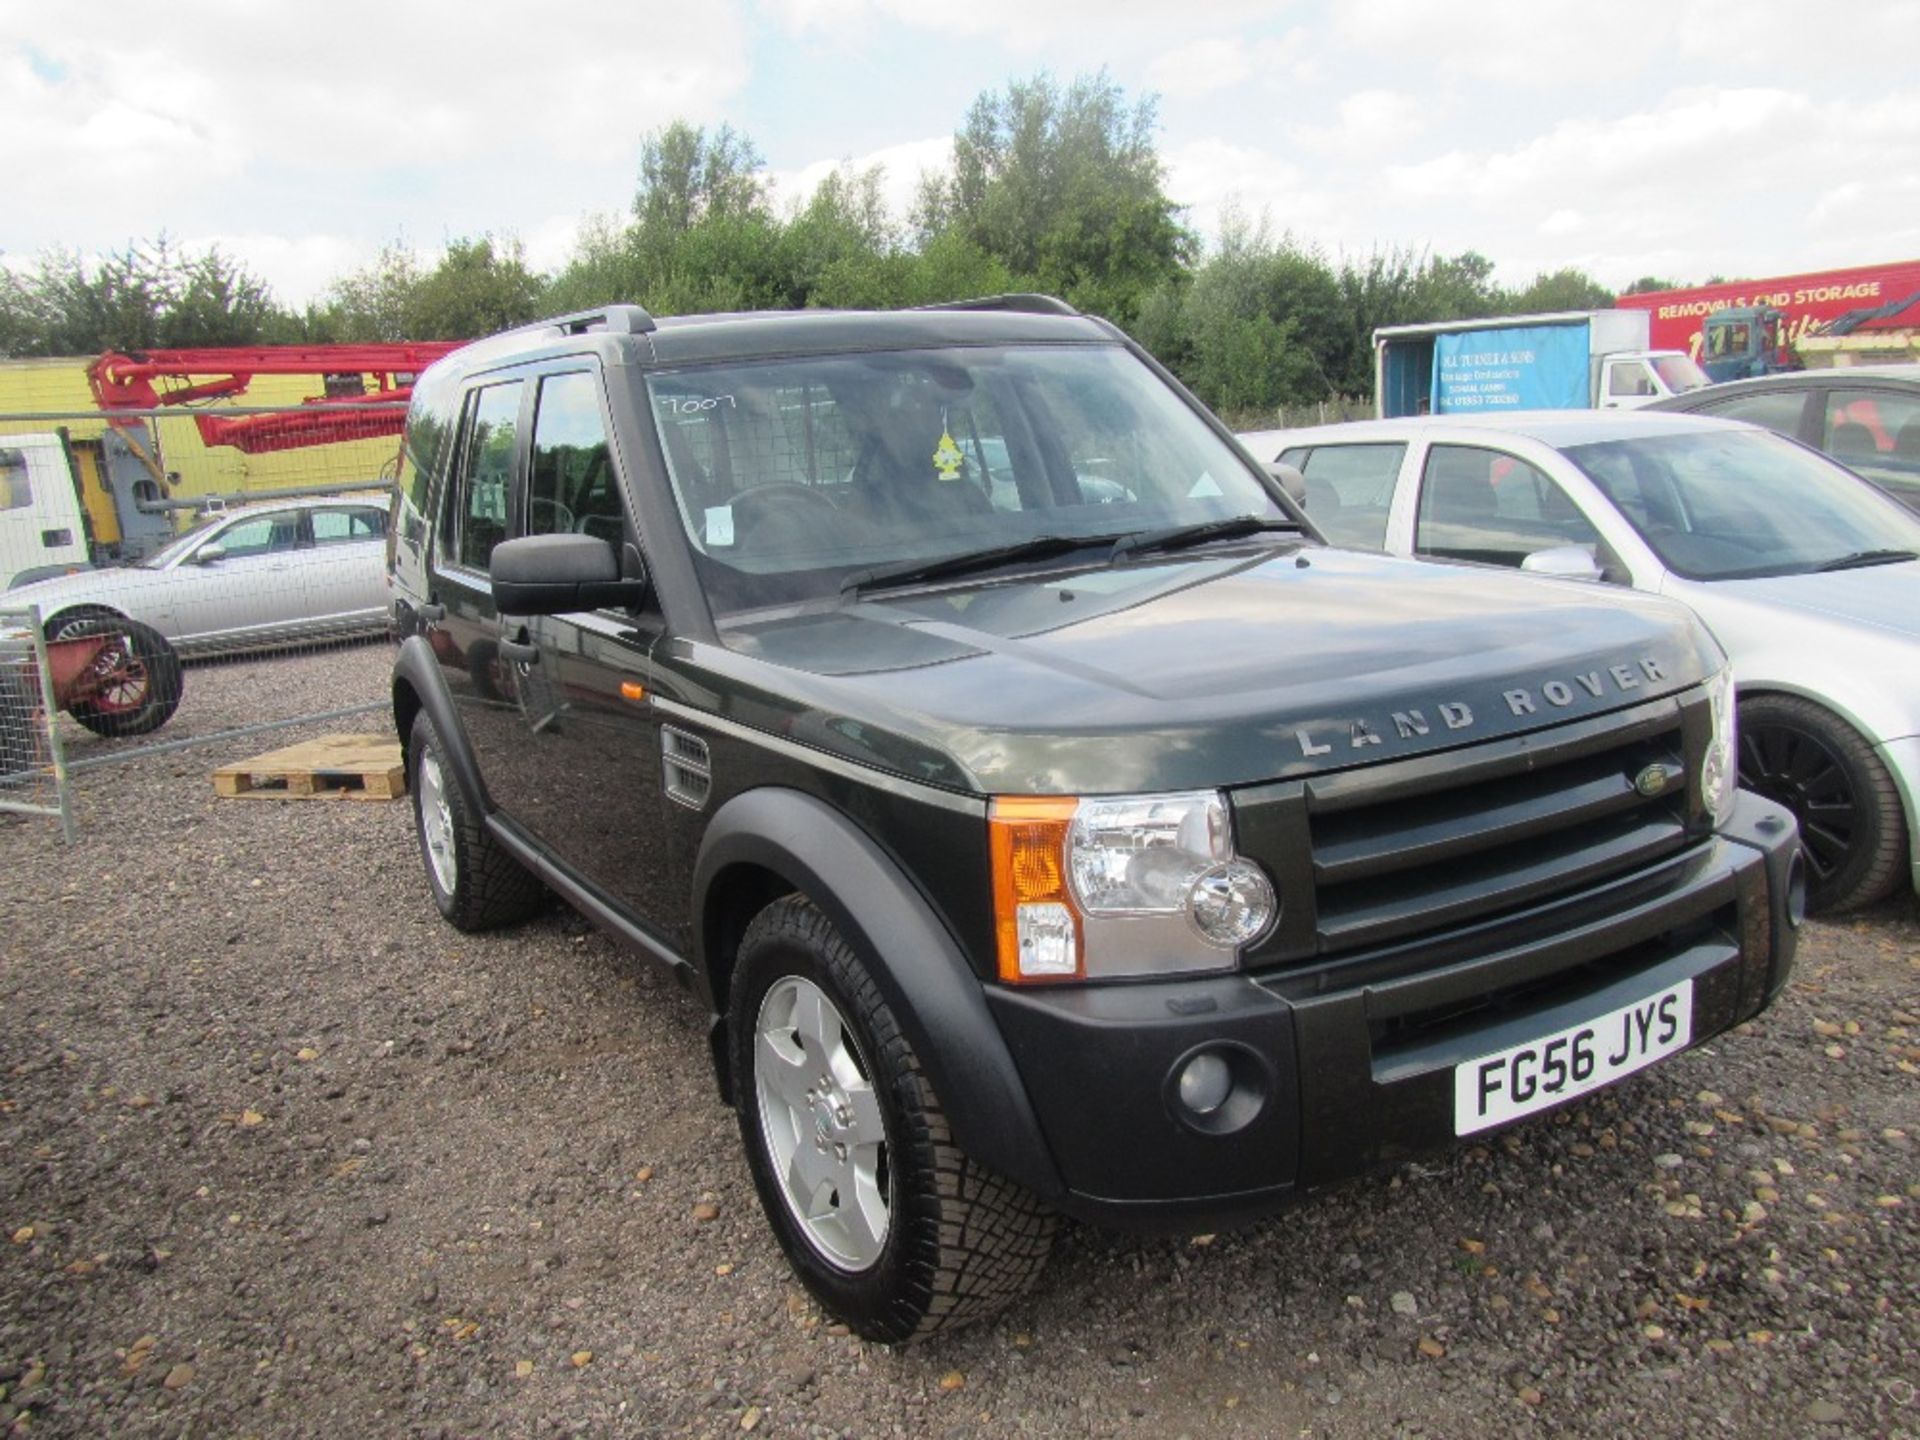 Land Rover Discovery TDV6 S Van with 2 Seats, Parts Service History, Harmon Kardon Sound, 6 Stack - Image 3 of 6